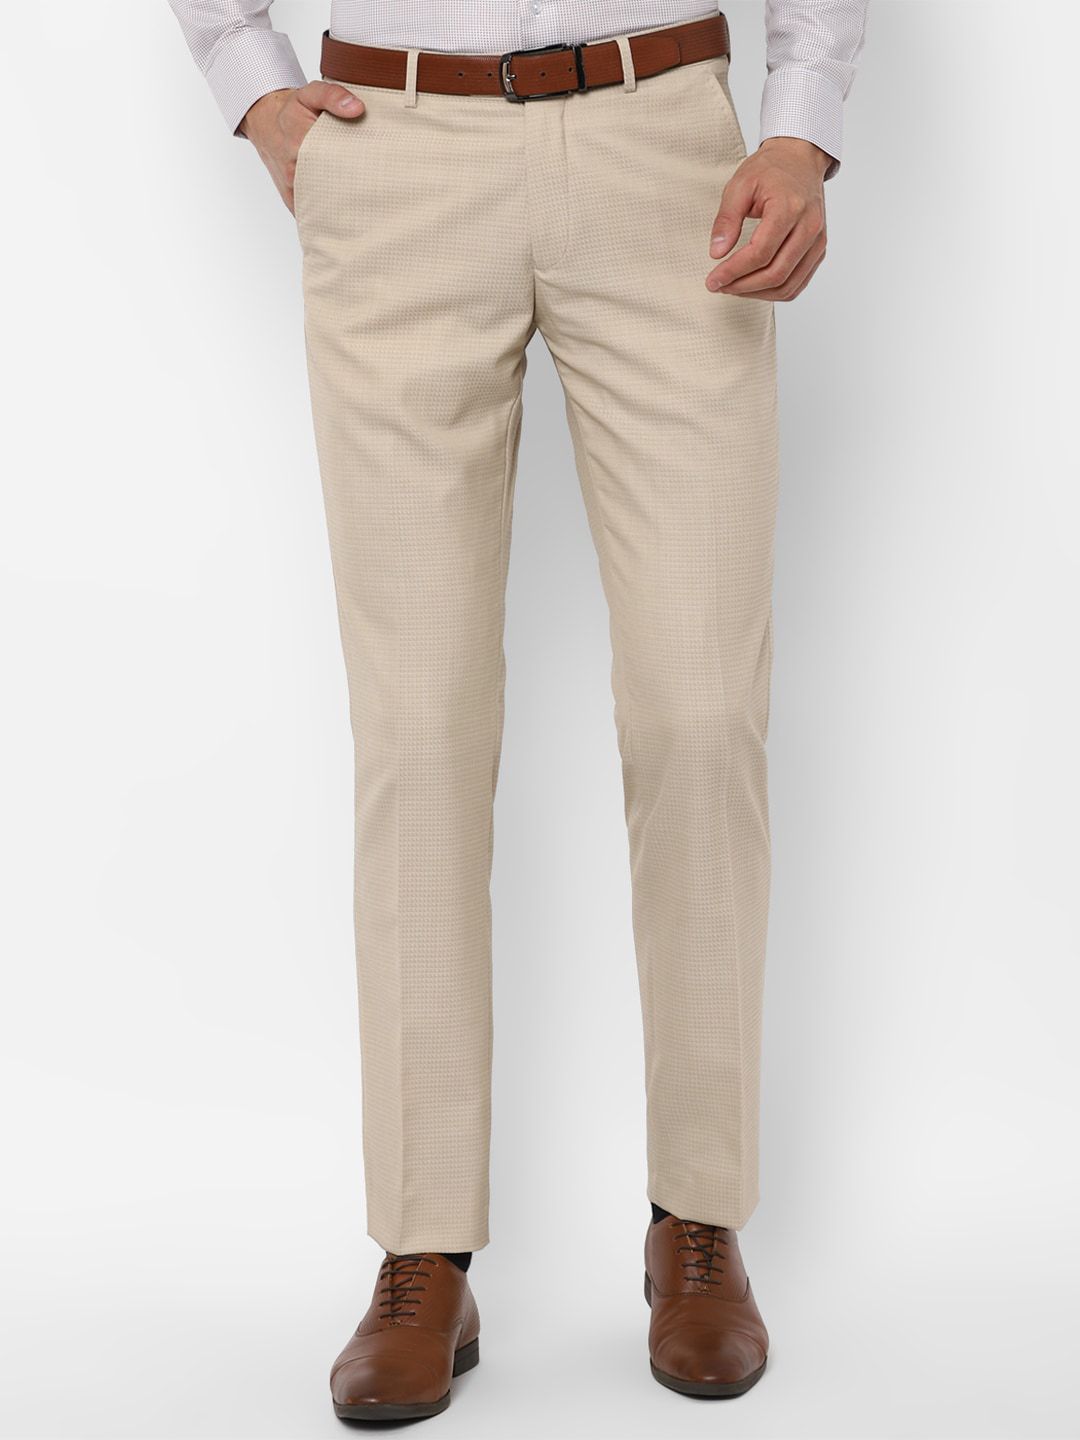 Buy LOUIS PHILIPPE SPORTS Solid Cotton Blend Tapered Fit Mens Casual Trouser   Shoppers Stop